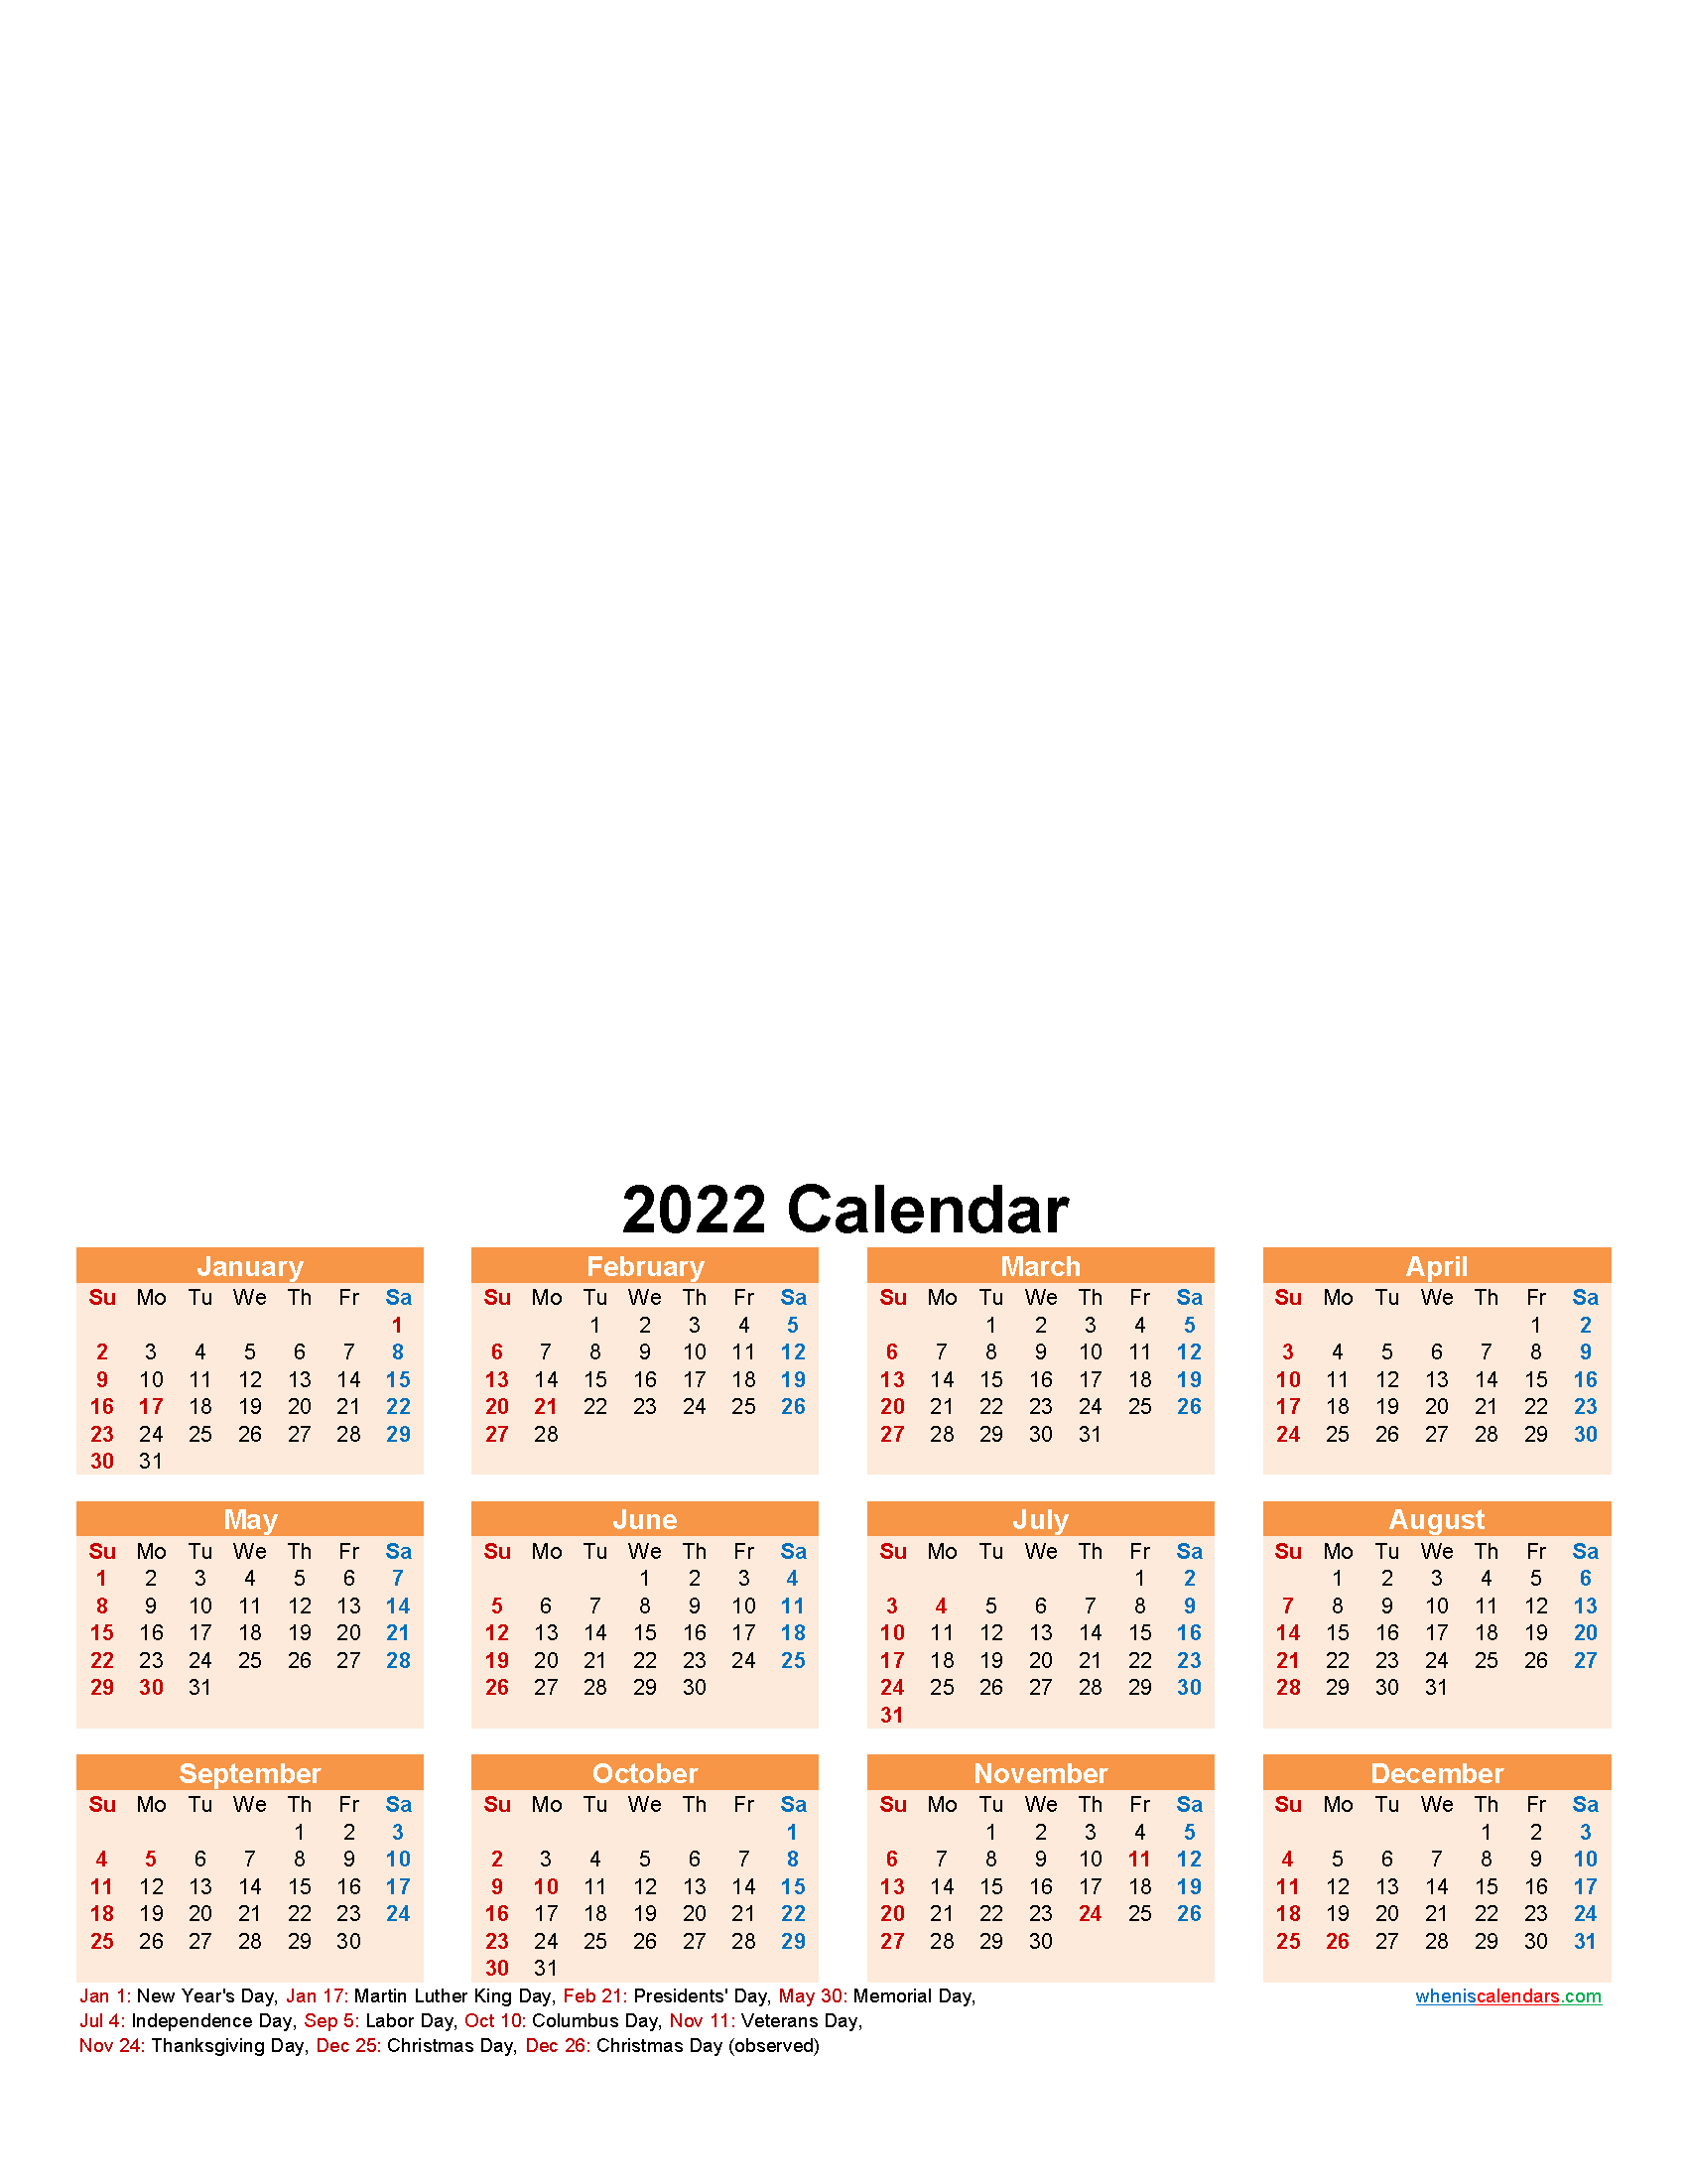 Customized Calendar 2022 Free.Create Your Own Photo Calendar Online Free 2022 Template No F22y14